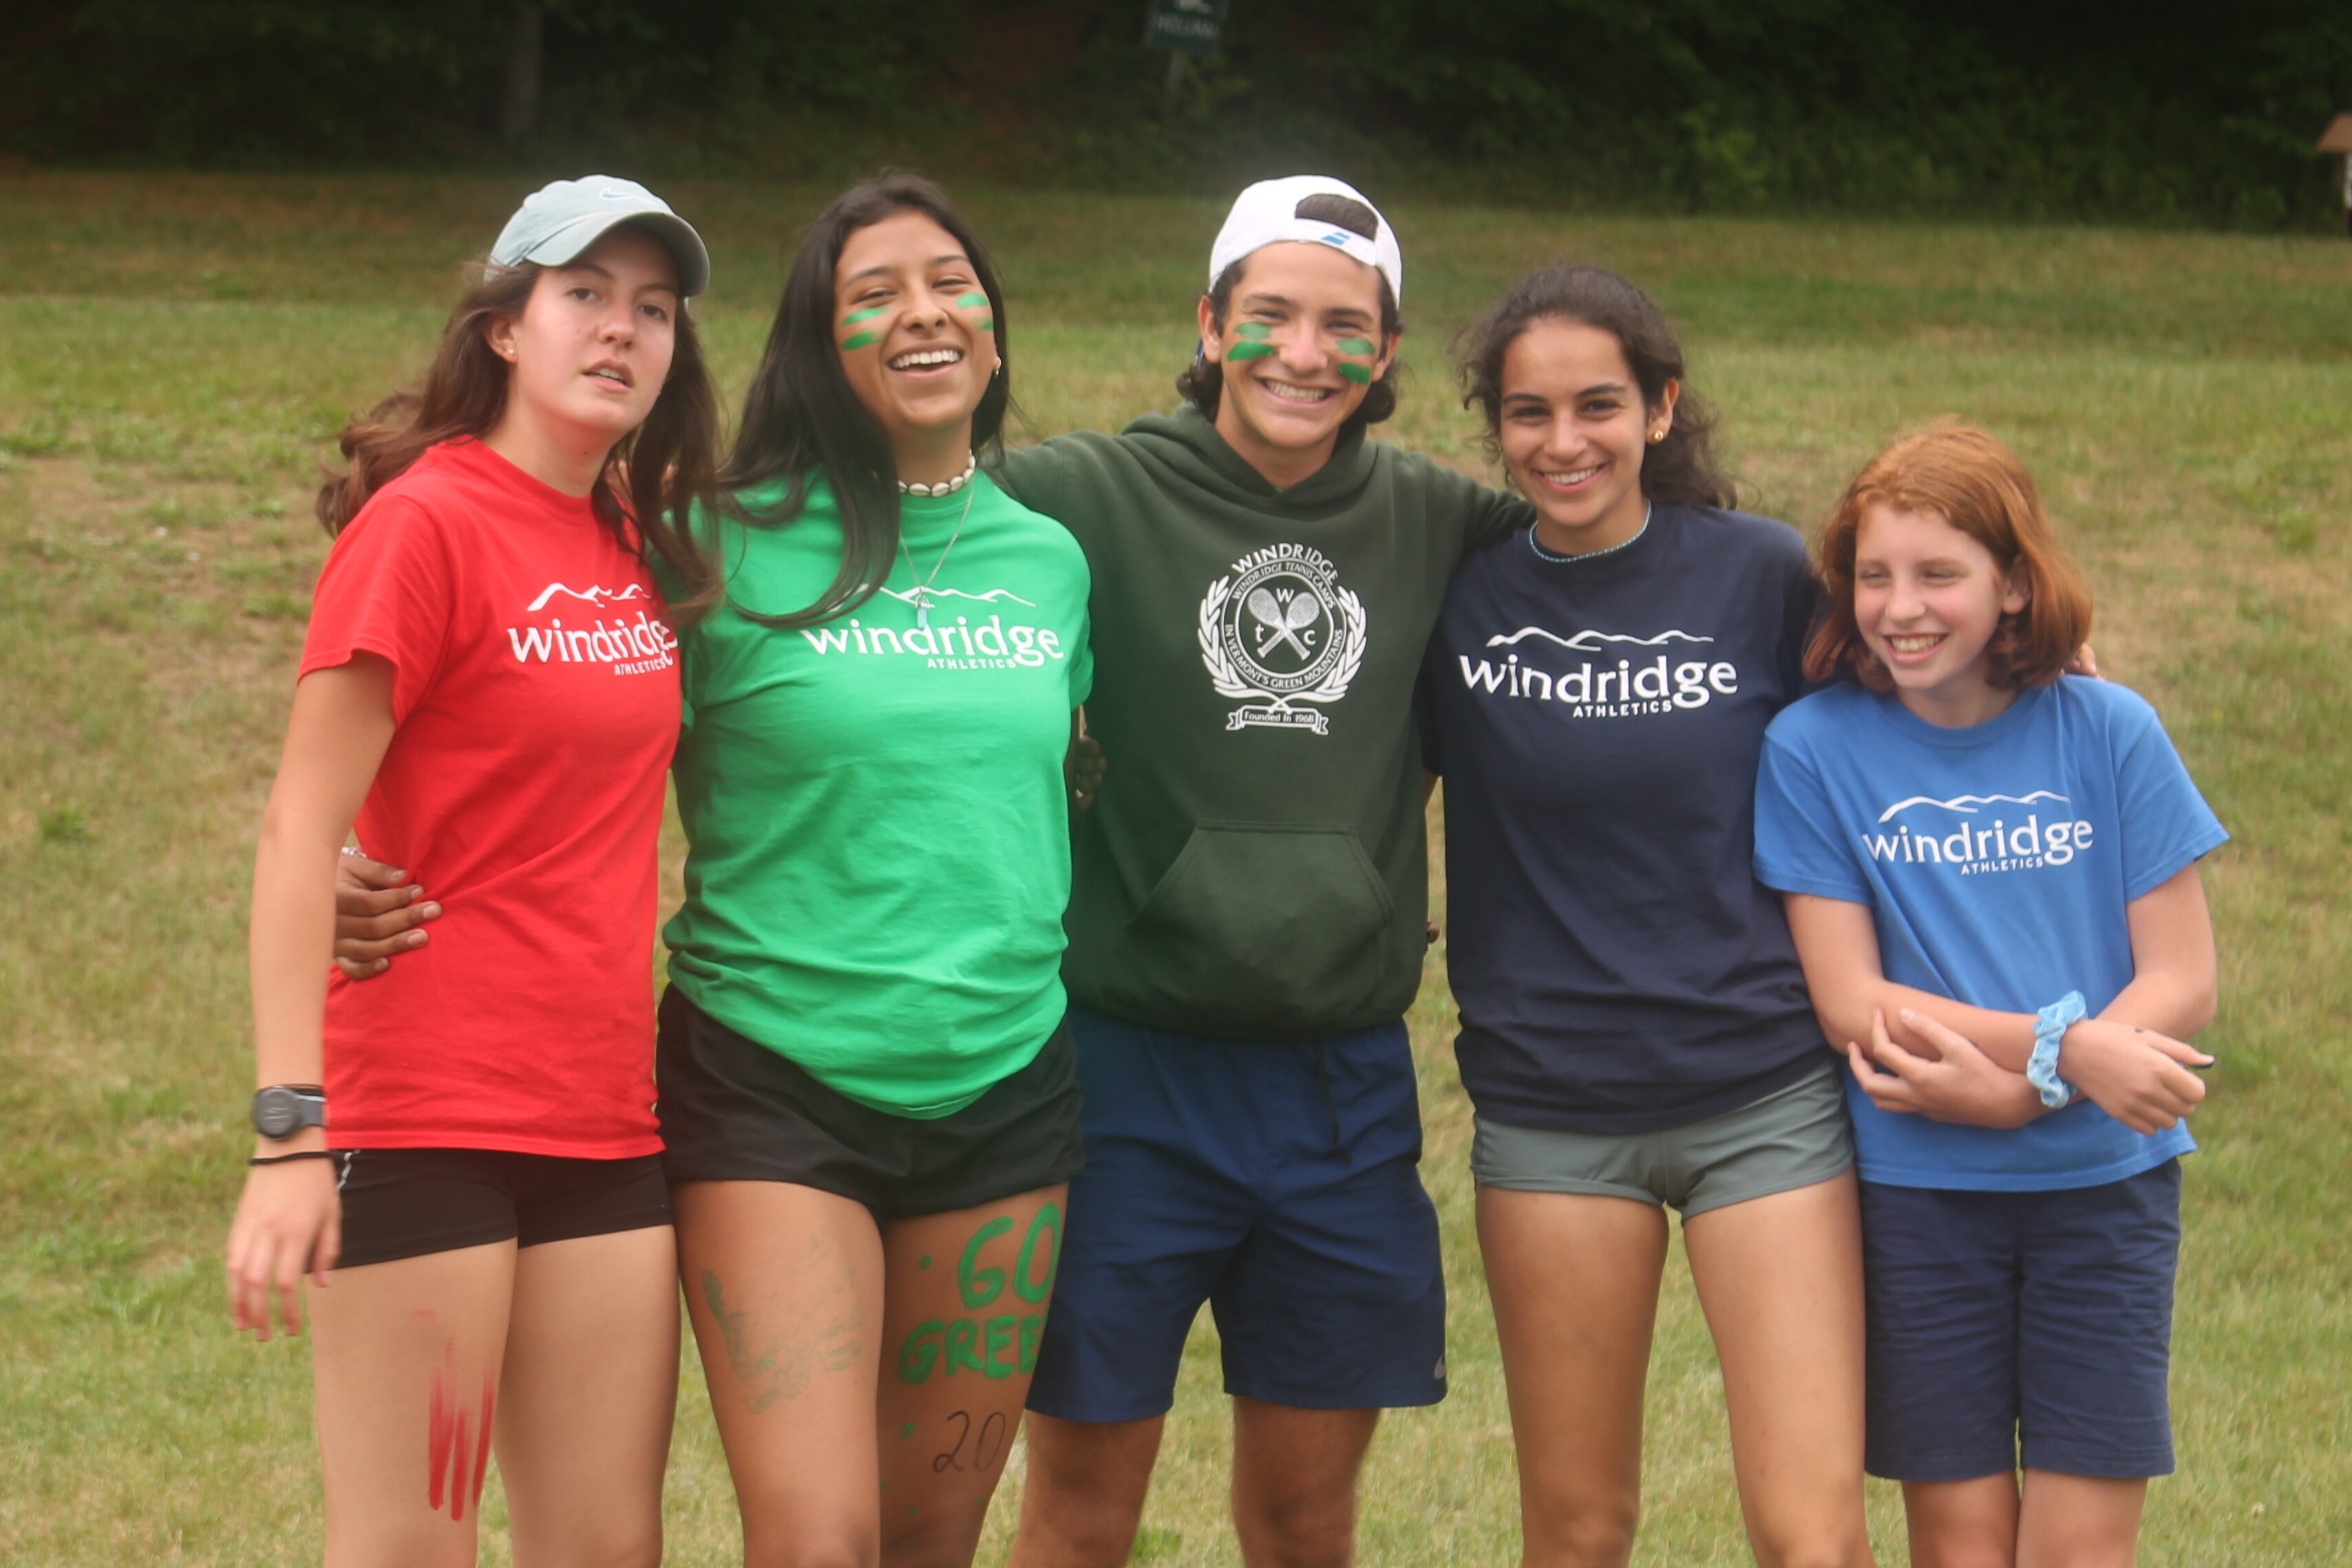 group of campers smiling together outside